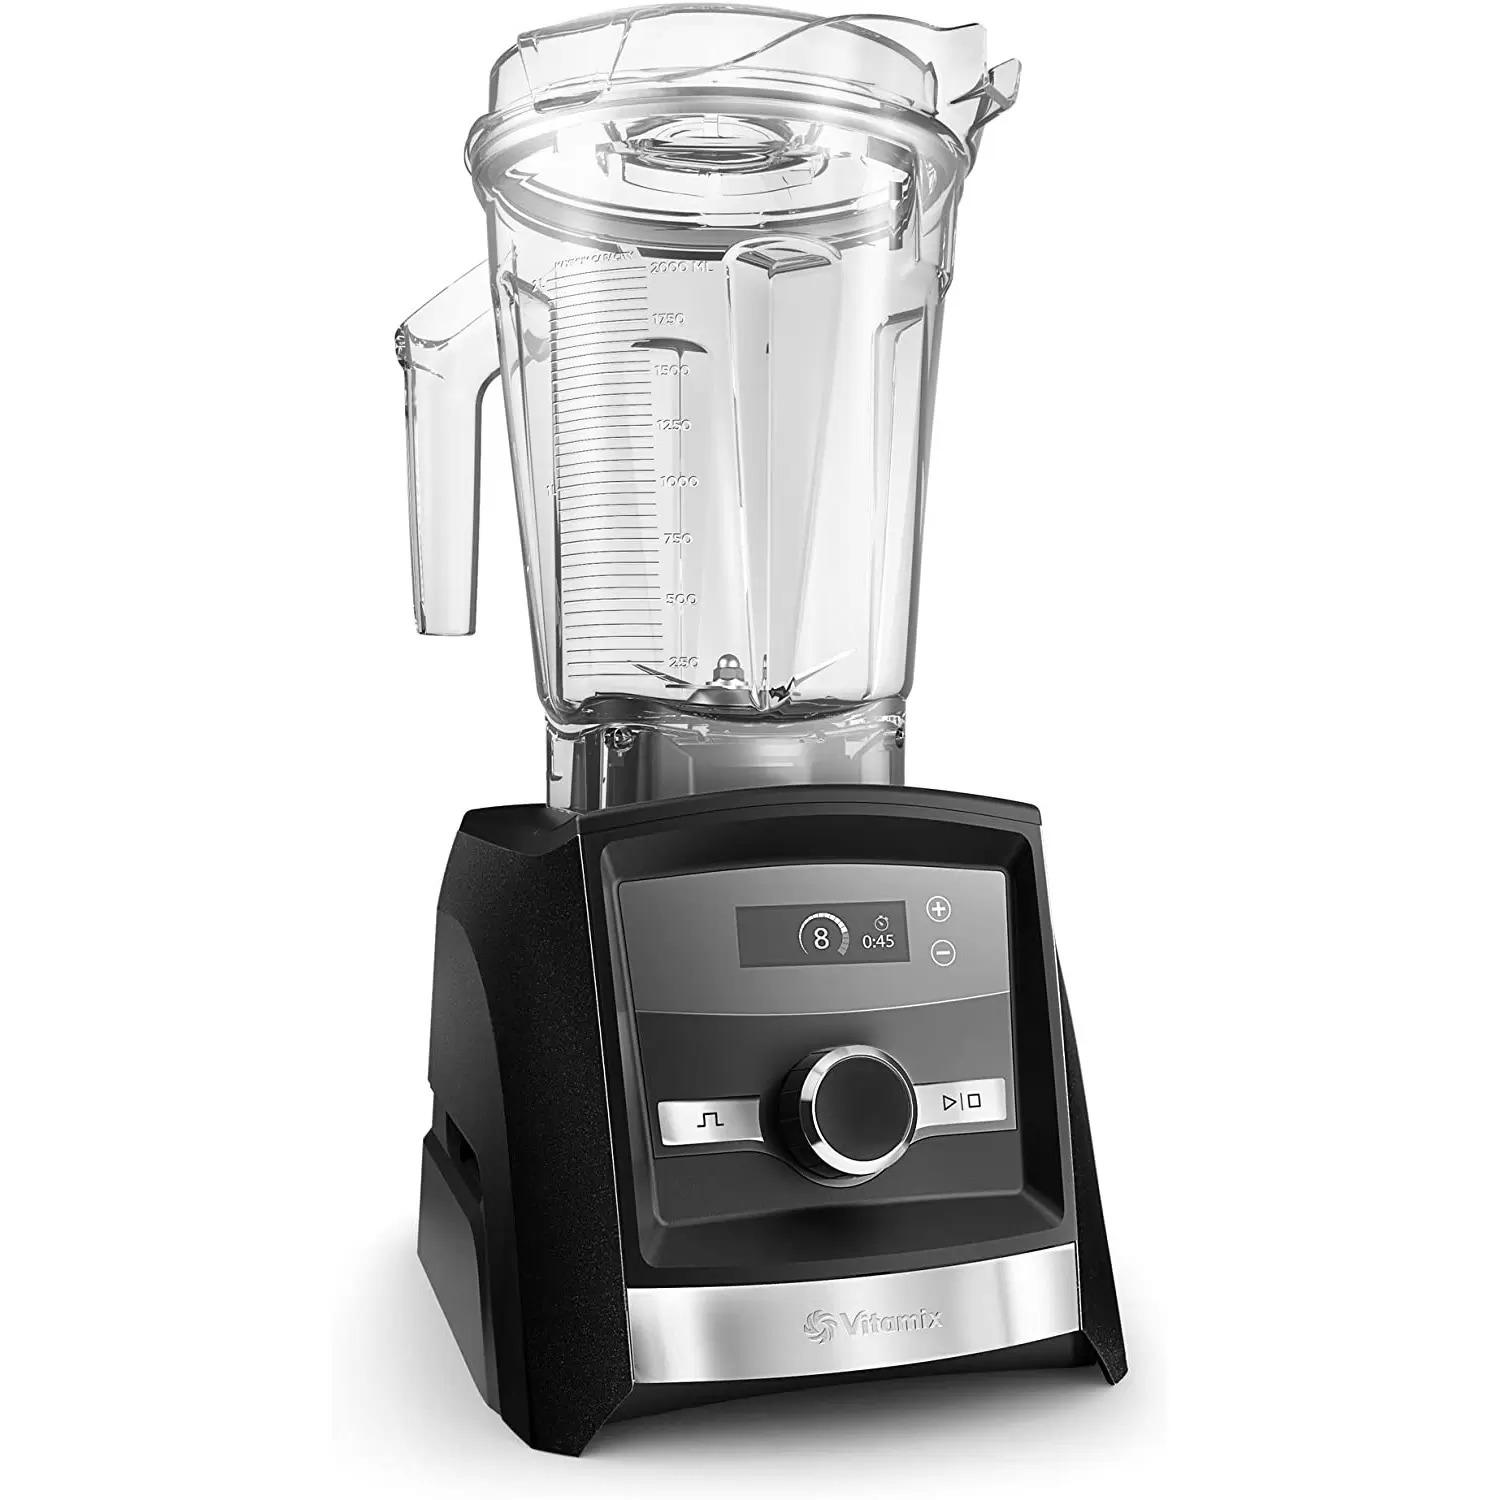 Vitamix A3300 Ascent Series Smart Blender for $349.95 Shipped